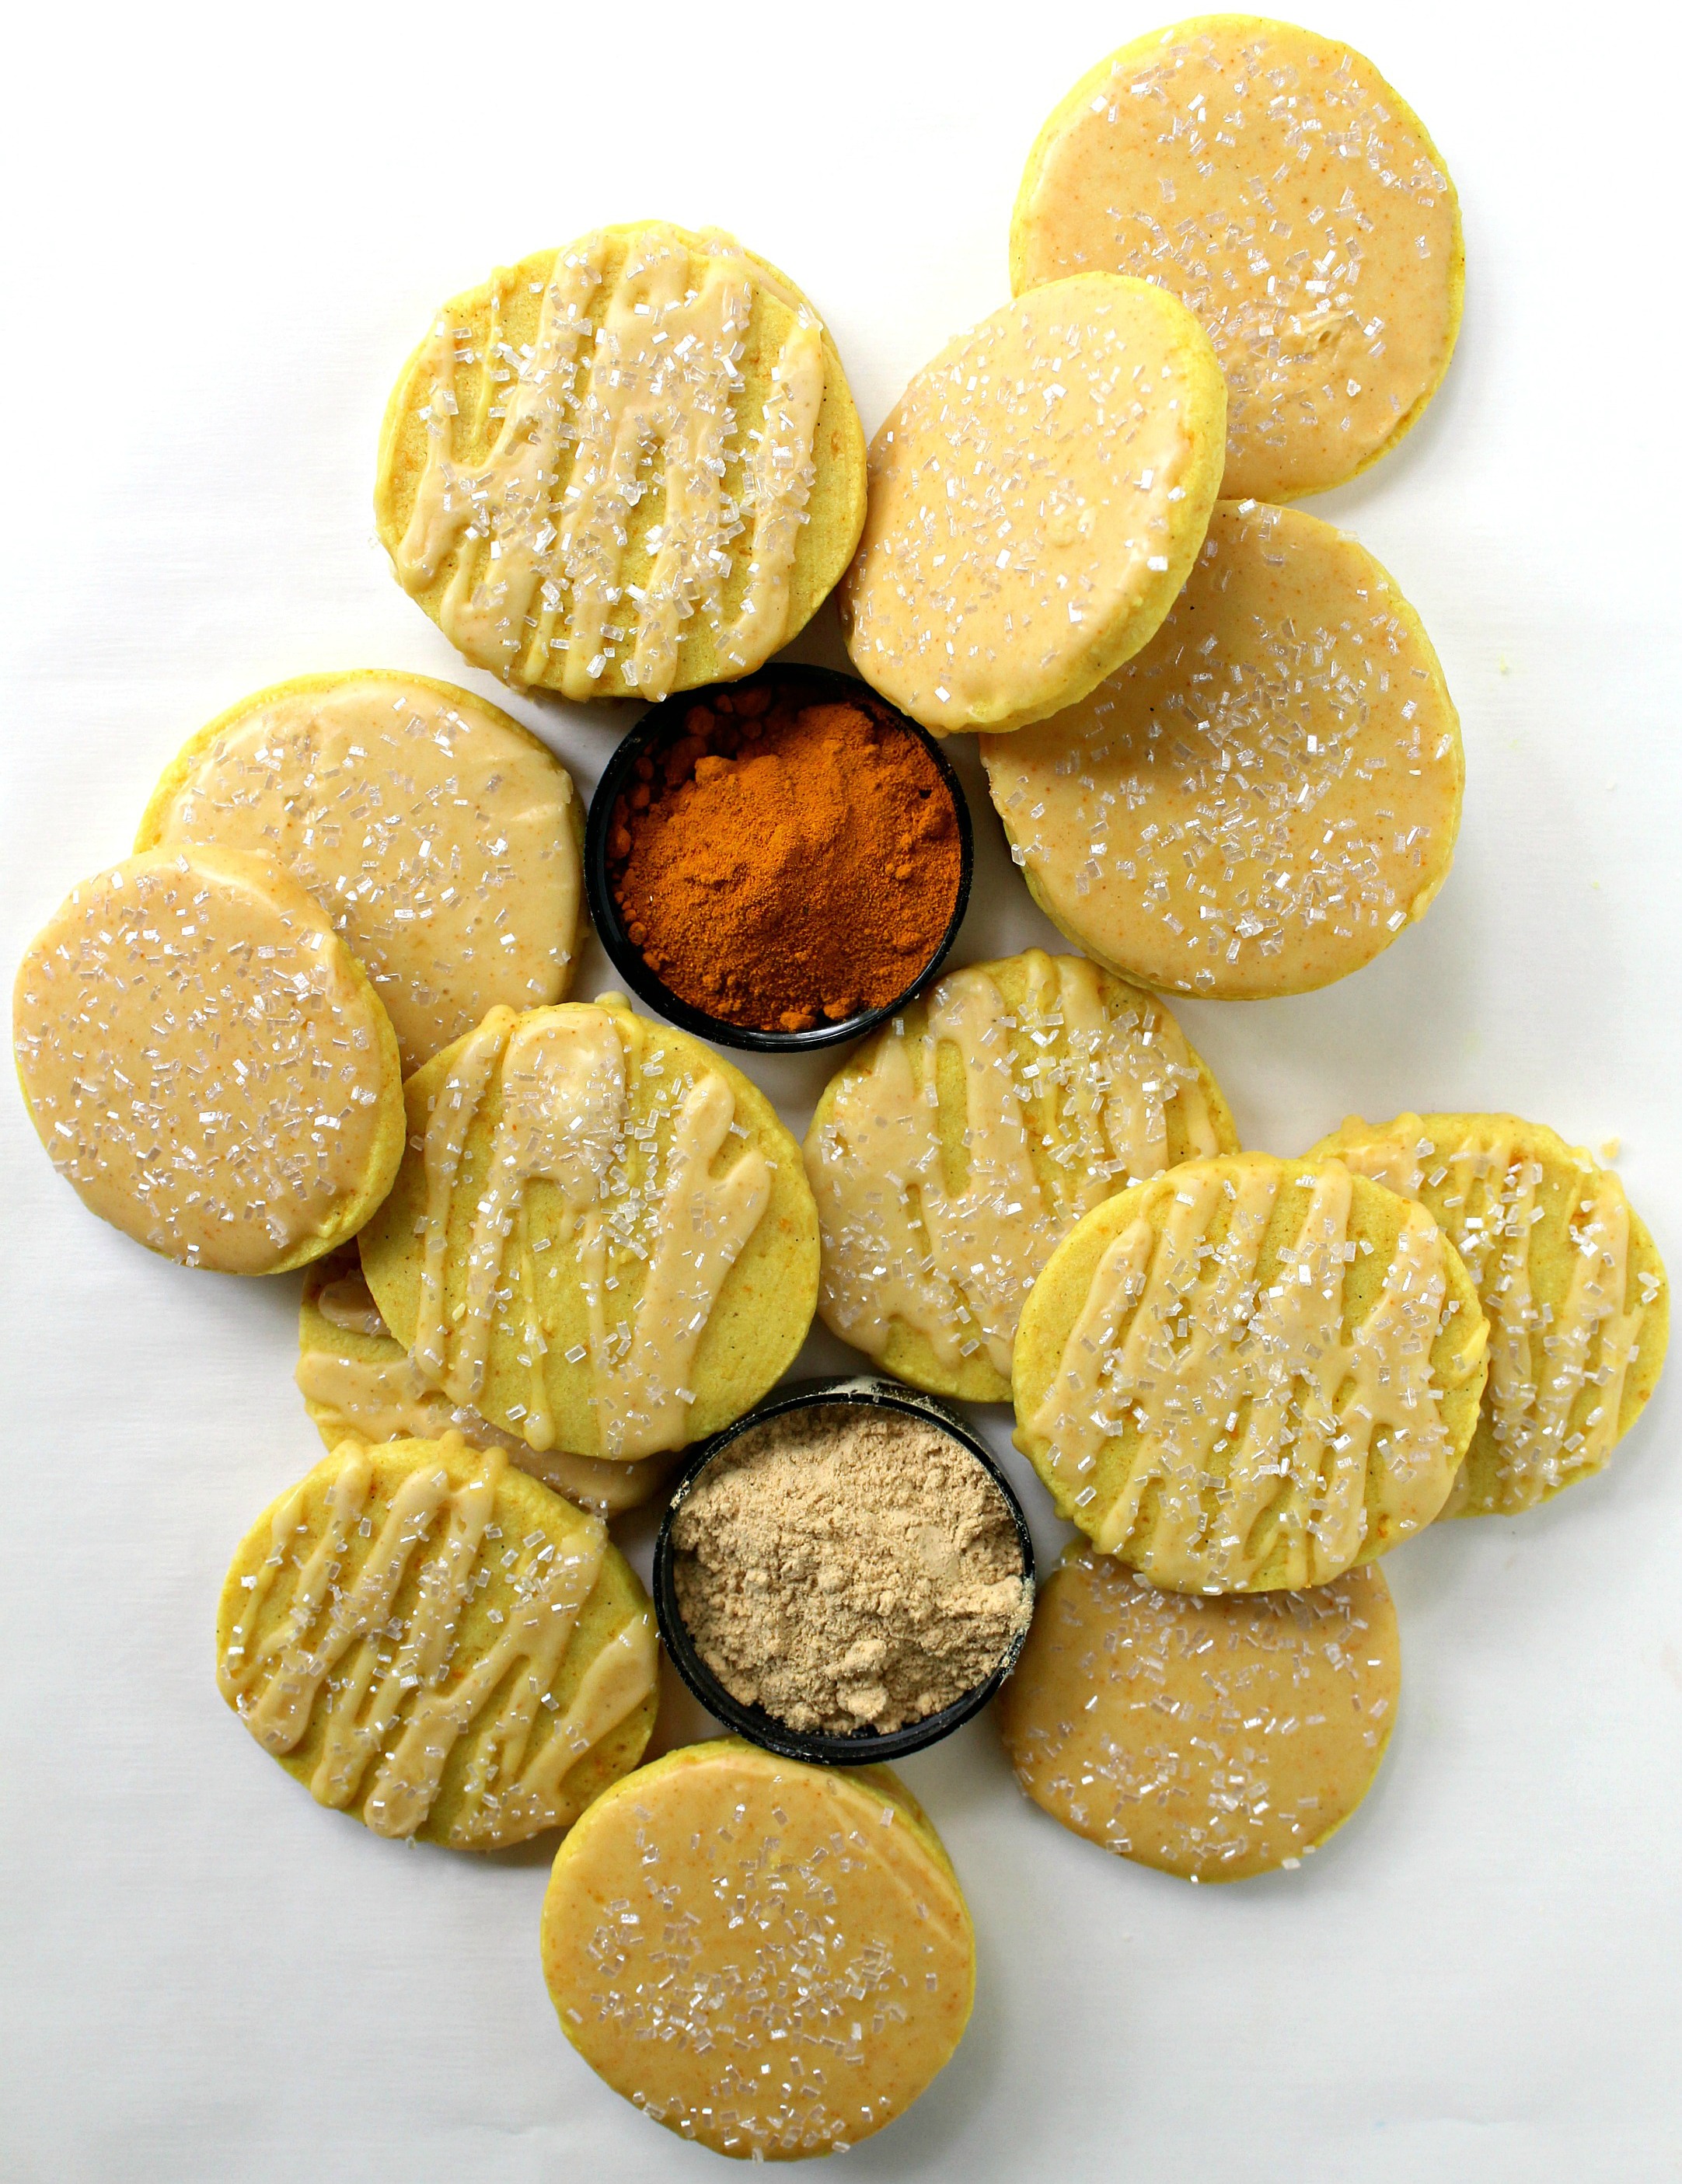 Iced, light yellow Turmeric Cookies on a white background.